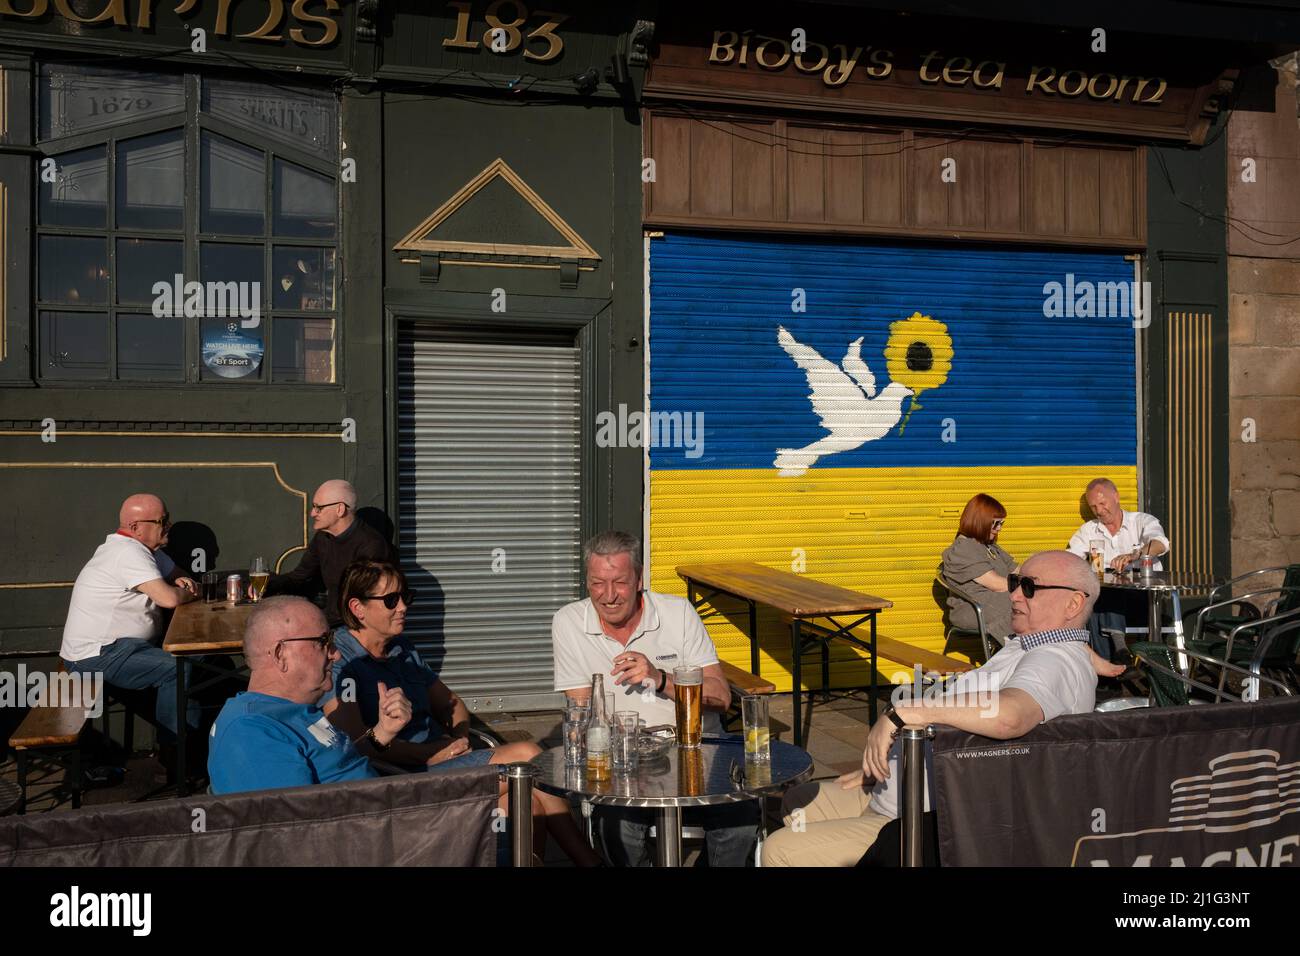 Glasgow, UK, 25th March 2022. People enjoy a drink in the sun in front of a mural on the wall of BiddyÕs Tea Room depicting the Ukrainian flag and a dove of peace, painted to show support for Ukraine in their ongoing war against the invasion by Russia, in the east end of Glasgow, Scotland, 25 March 2022. Photo credit: Jeremy Sutton-Hibbert/Alamy Live News. Stock Photo